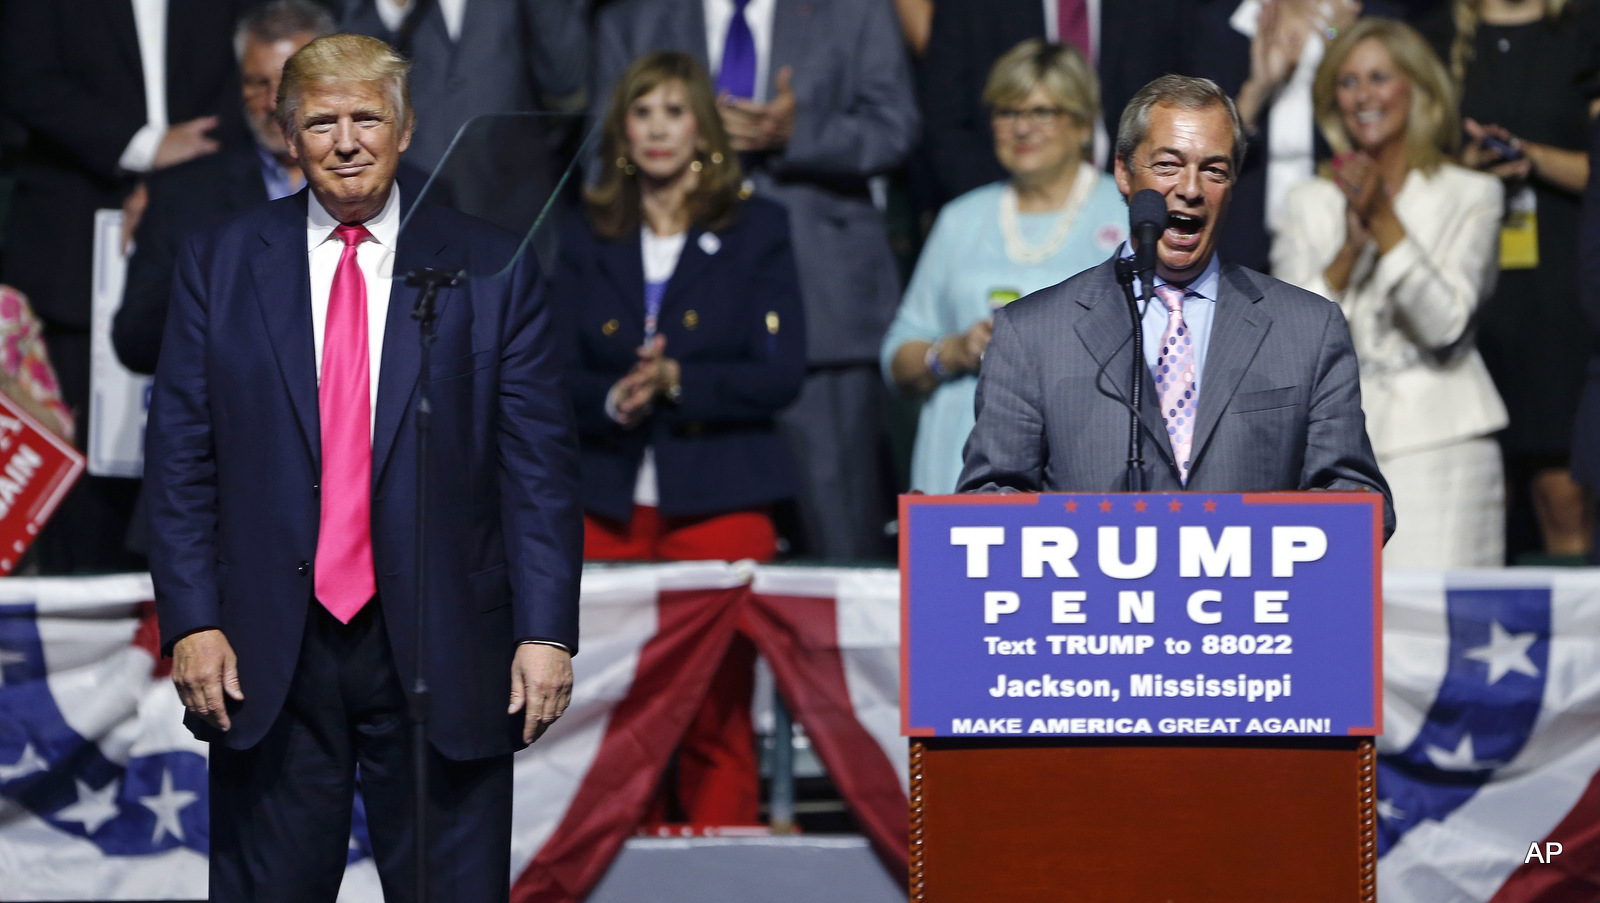 Nigel Farage, ex-leader of the British UKIP party, speaks as Republican presidential candidate Donald Trump, left, listens, at Trump's campaign rally in Jackson, Miss., Wednesday, Aug. 24, 2016.